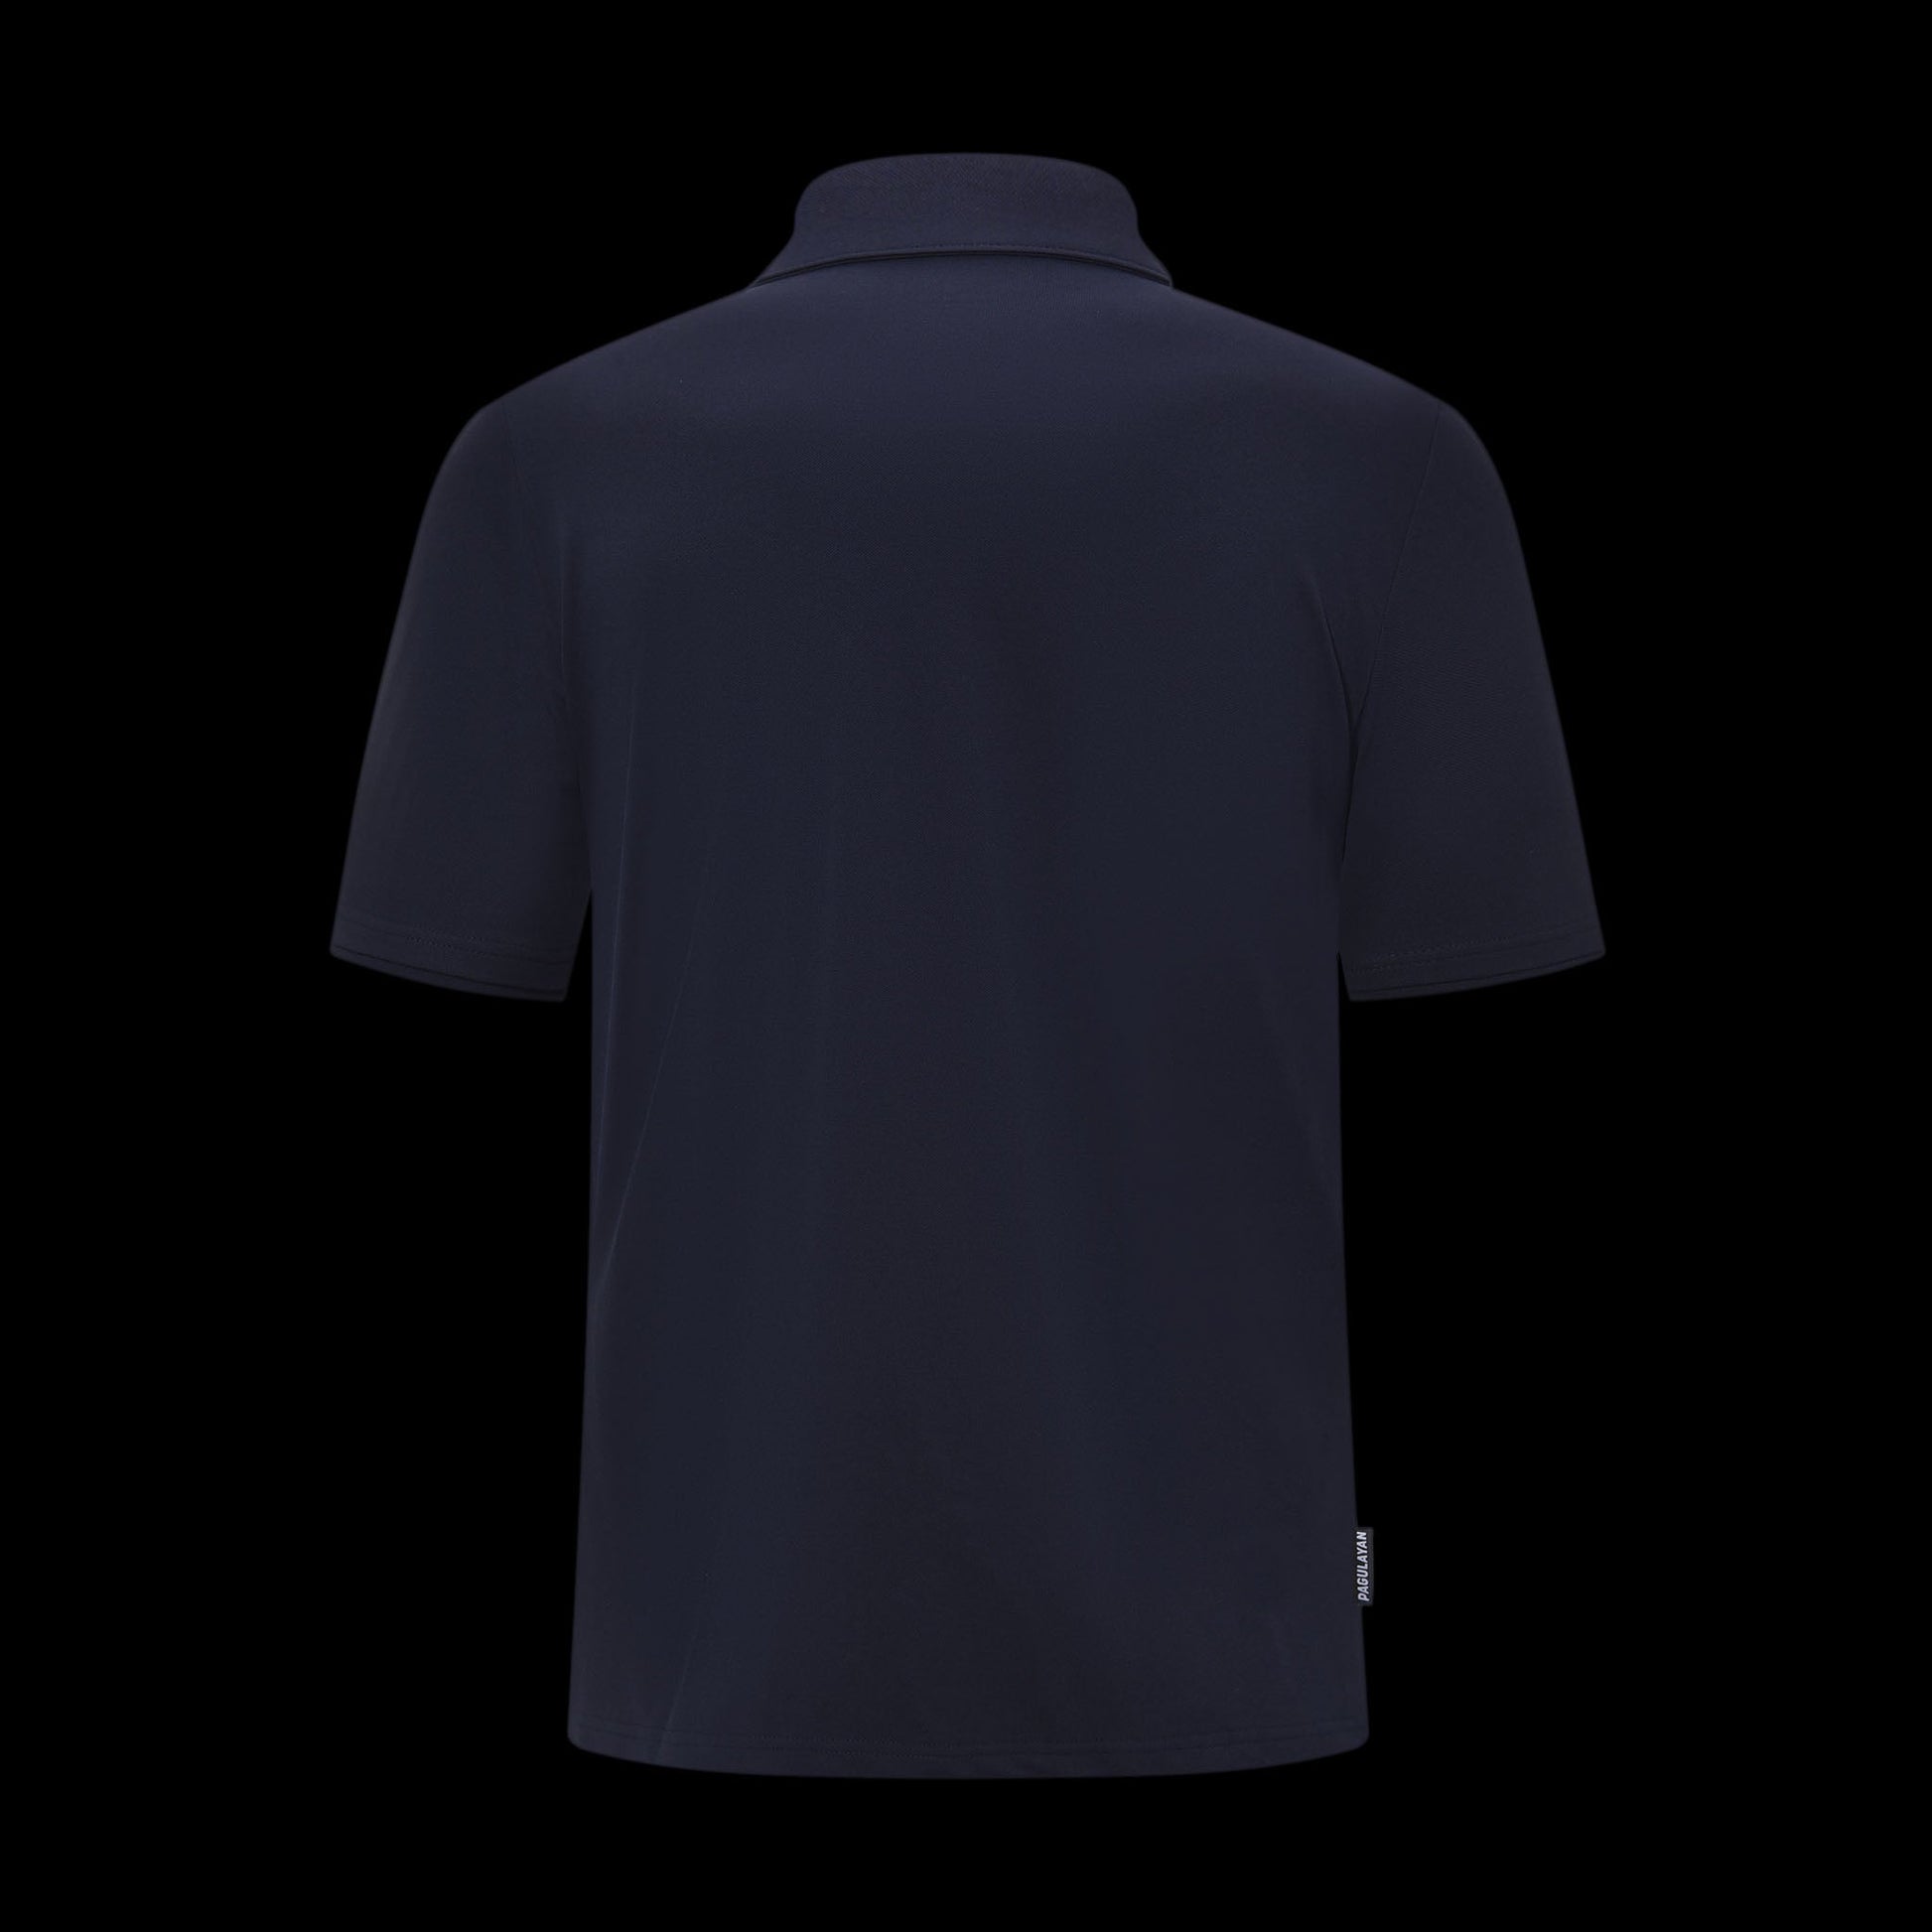 THE "JUST RIGHT" PIQUE POLO - Pagulayan